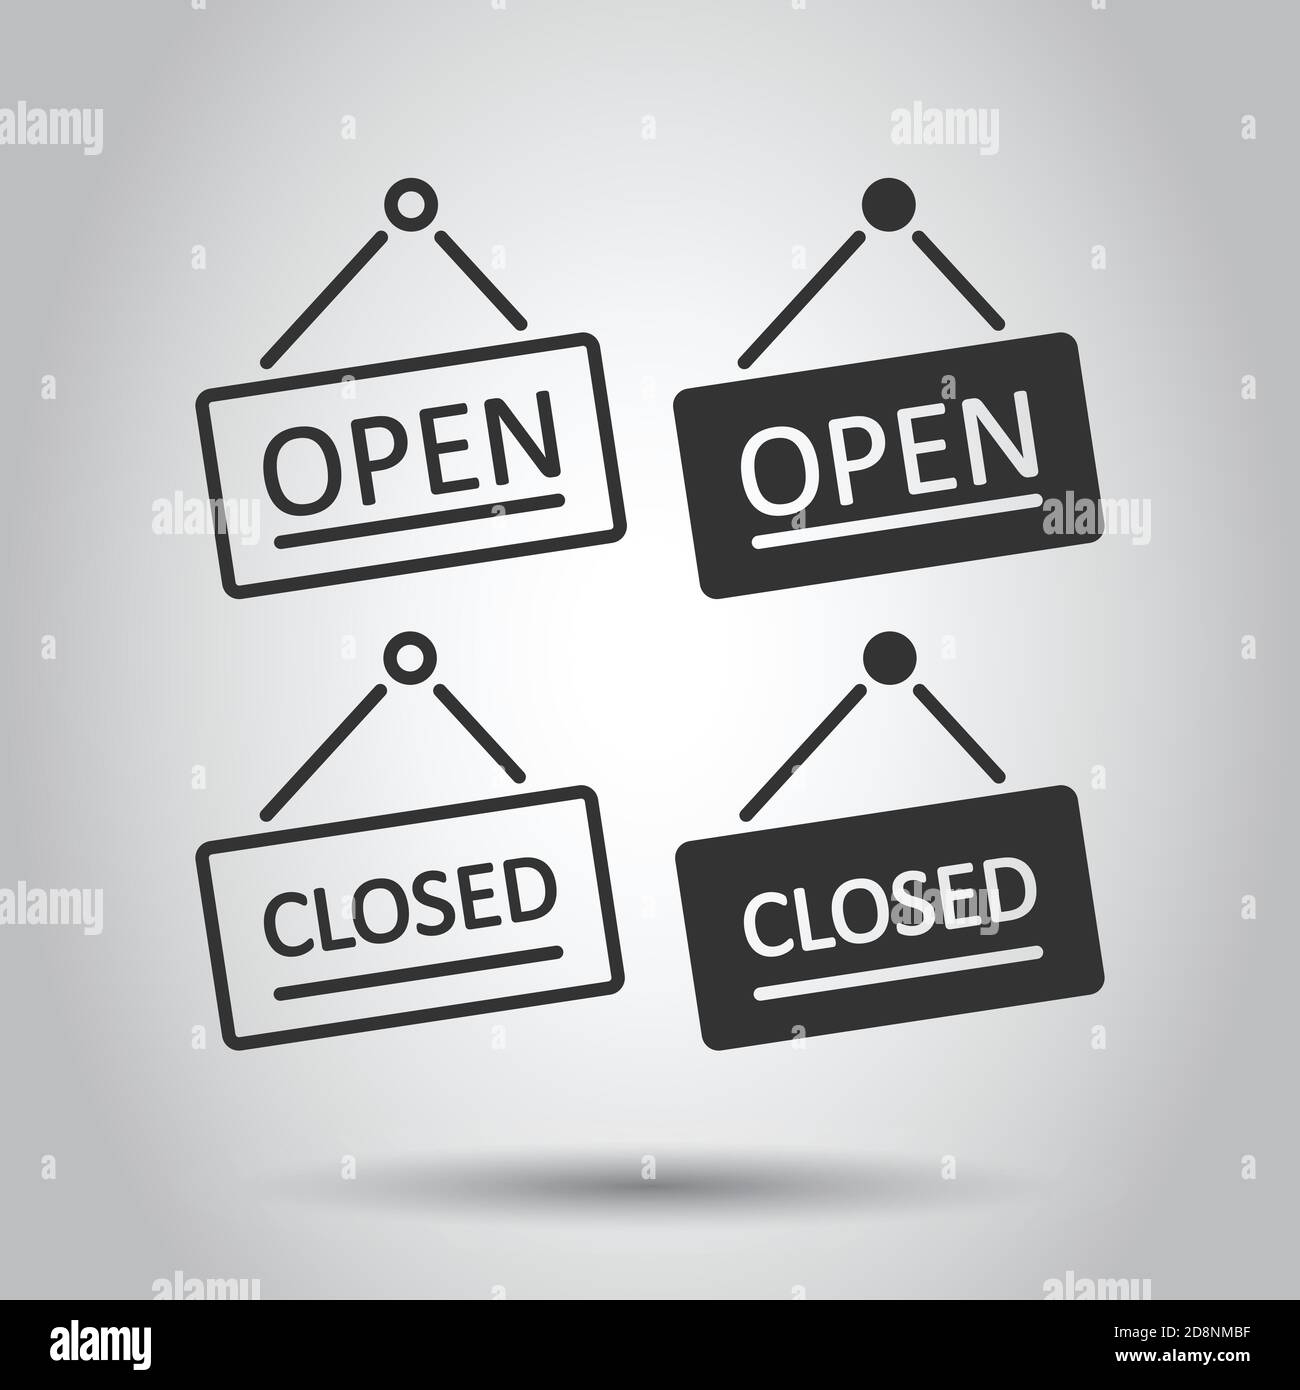 Open, closed sign icon in flat style. Accessibility vector illustration on white isolated background. Message business concept. Stock Vector